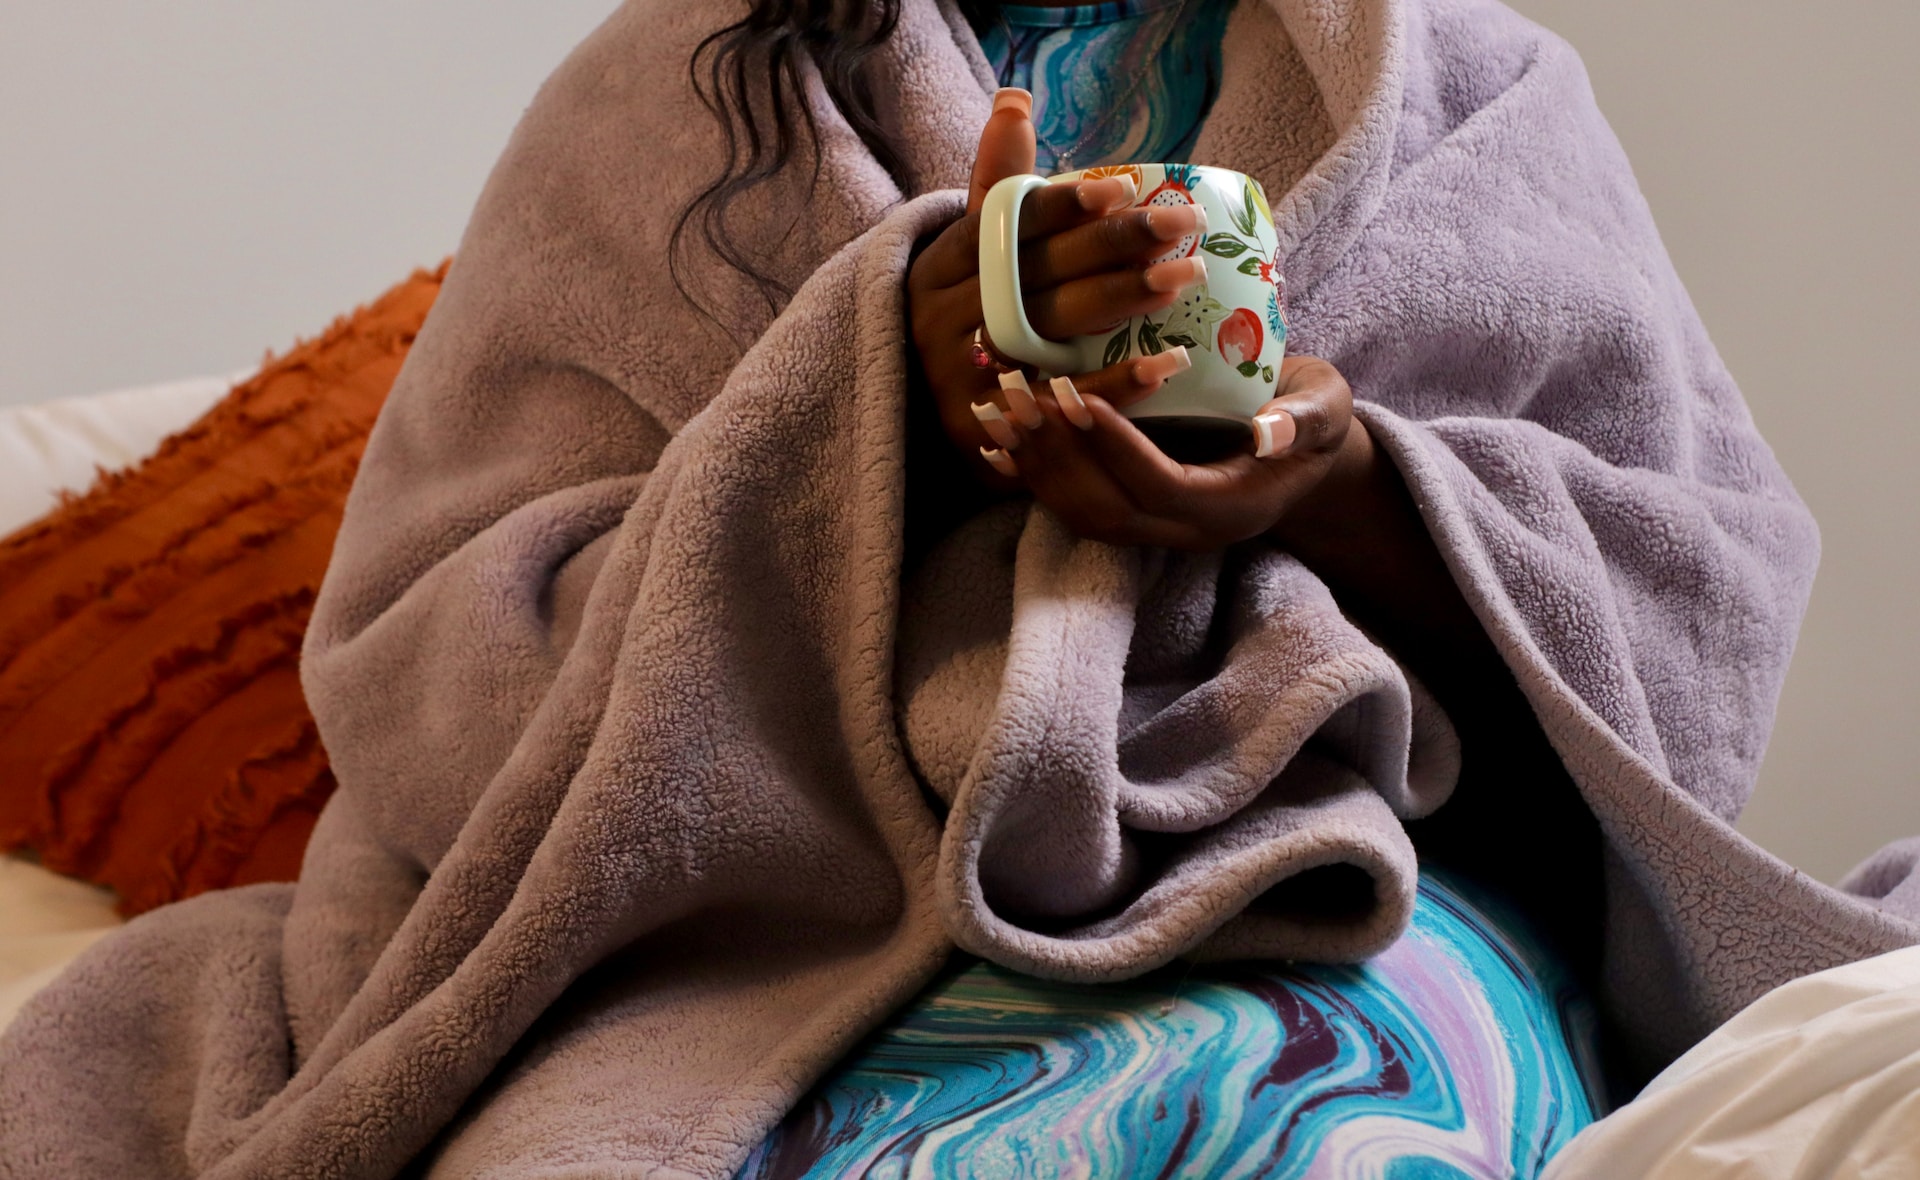 student sitting on the bed wrapped in a blanket and holding a cup of tea as part of her self care in college